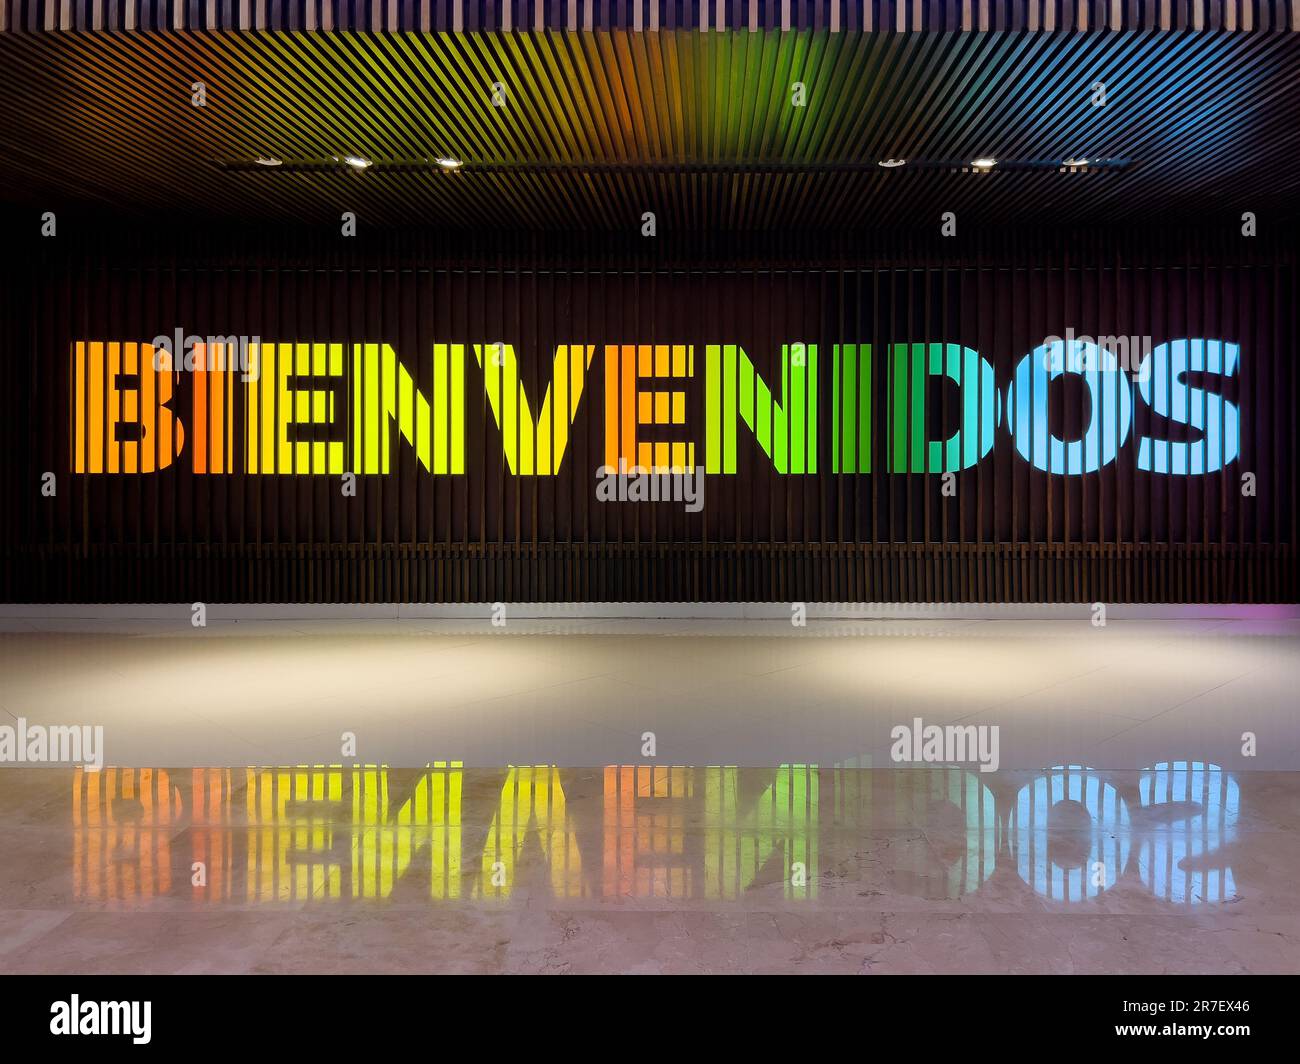 A colorful Bienvenidos Welcome sign at the Cancun airport with a reflection on the floor and ceiling. Stock Photo